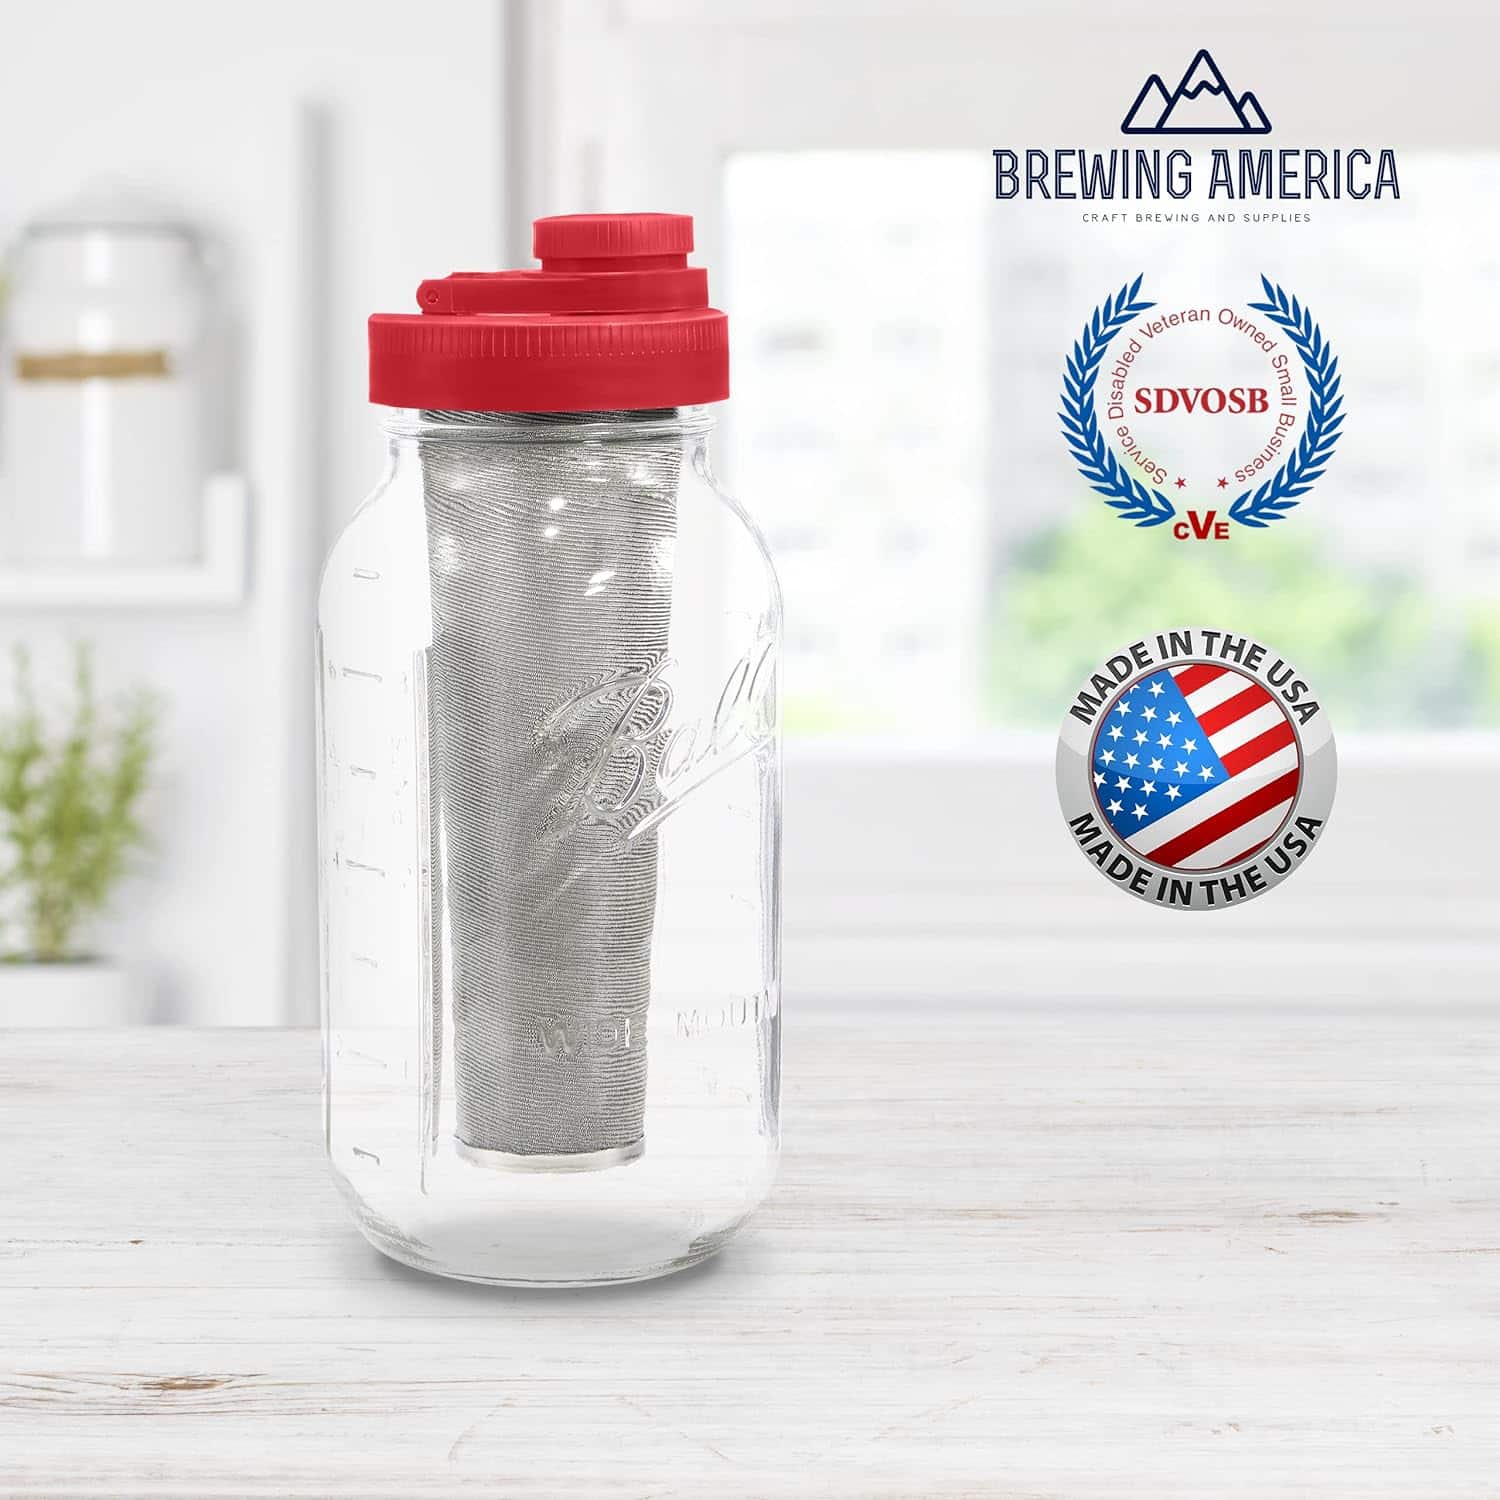 Brewing America Mason Jar Cold Brew Coffee Maker: The Perfect Addition to Your Coffee Routine